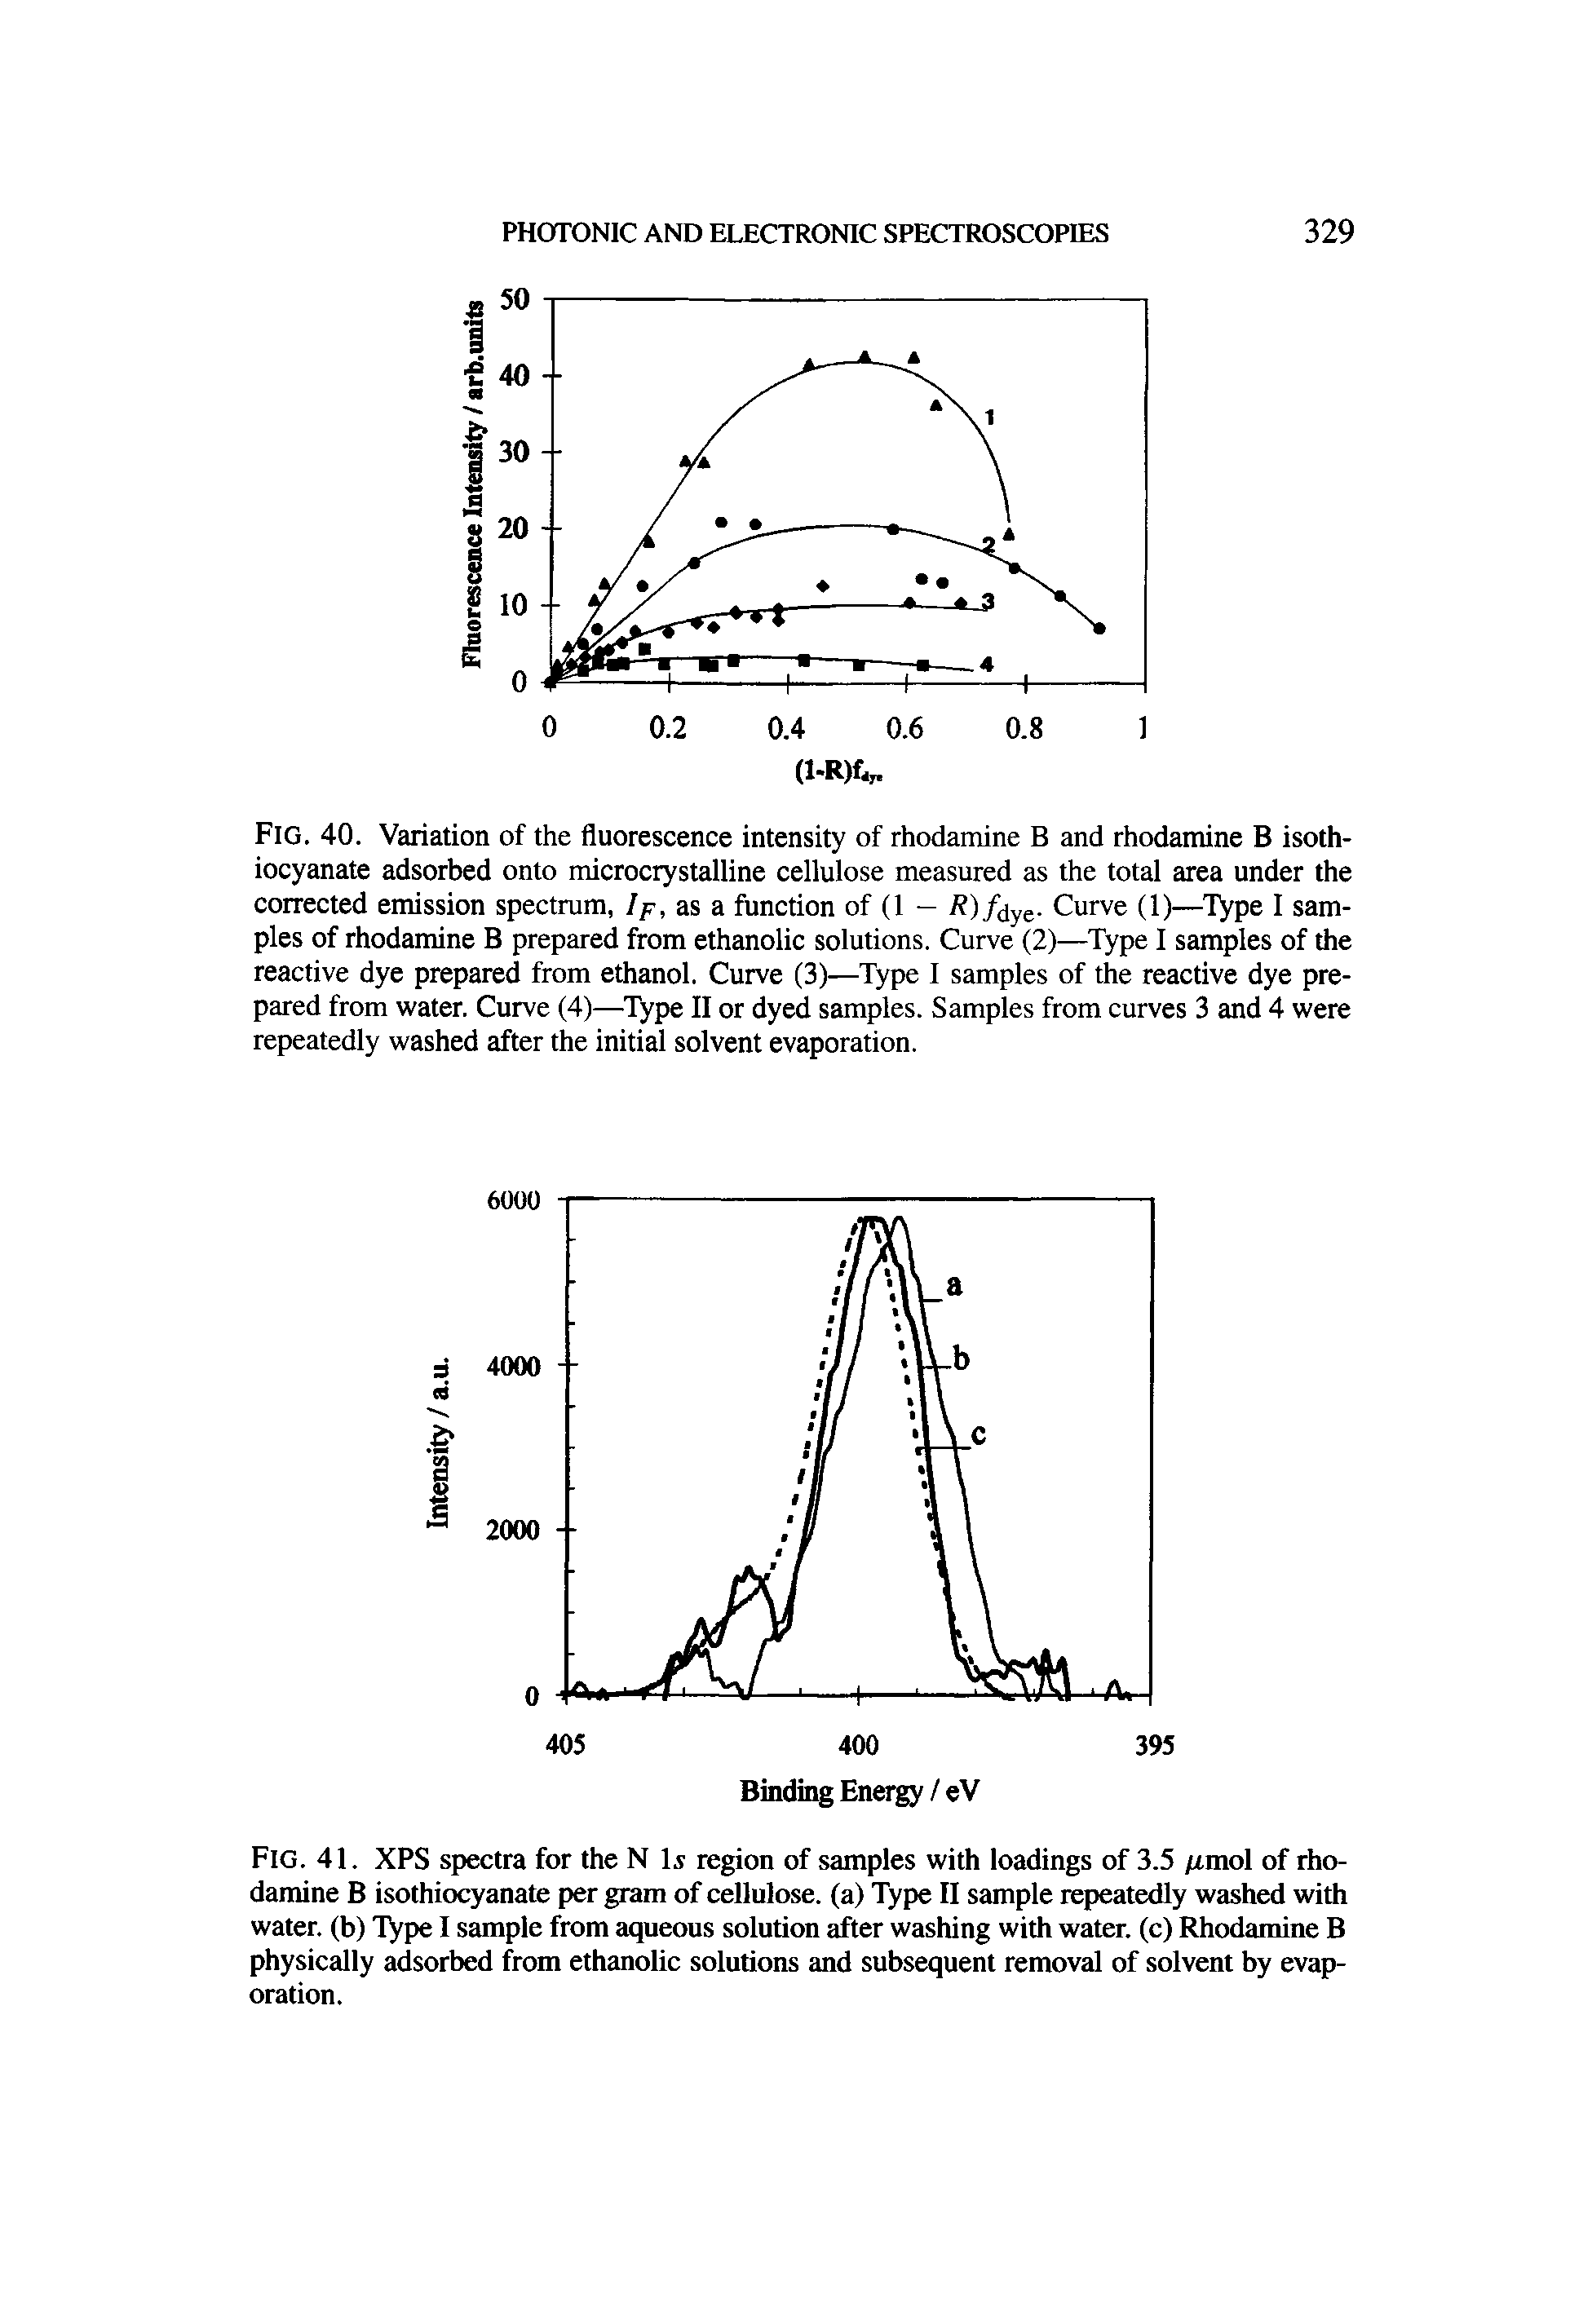 Fig. 40. Variation of the fluorescence intensity of rhodamine B and rhodamine B isothiocyanate adsorbed onto microcrystalline cellulose measured as the total area under the corrected emission spectrum,, as a function of (1 — 7 )/dye. Curve (1)—Type I samples of rhodamine B prepared from ethanolic solutions. Curve (2)—Type I samples of the reactive dye prepared from ethanol. Curve (3)—Type I samples of the reactive dye prepared from water. Curve (4)—Type II or dyed samples. Samples from curves 3 and 4 were repeatedly washed after the initial solvent evaporation.